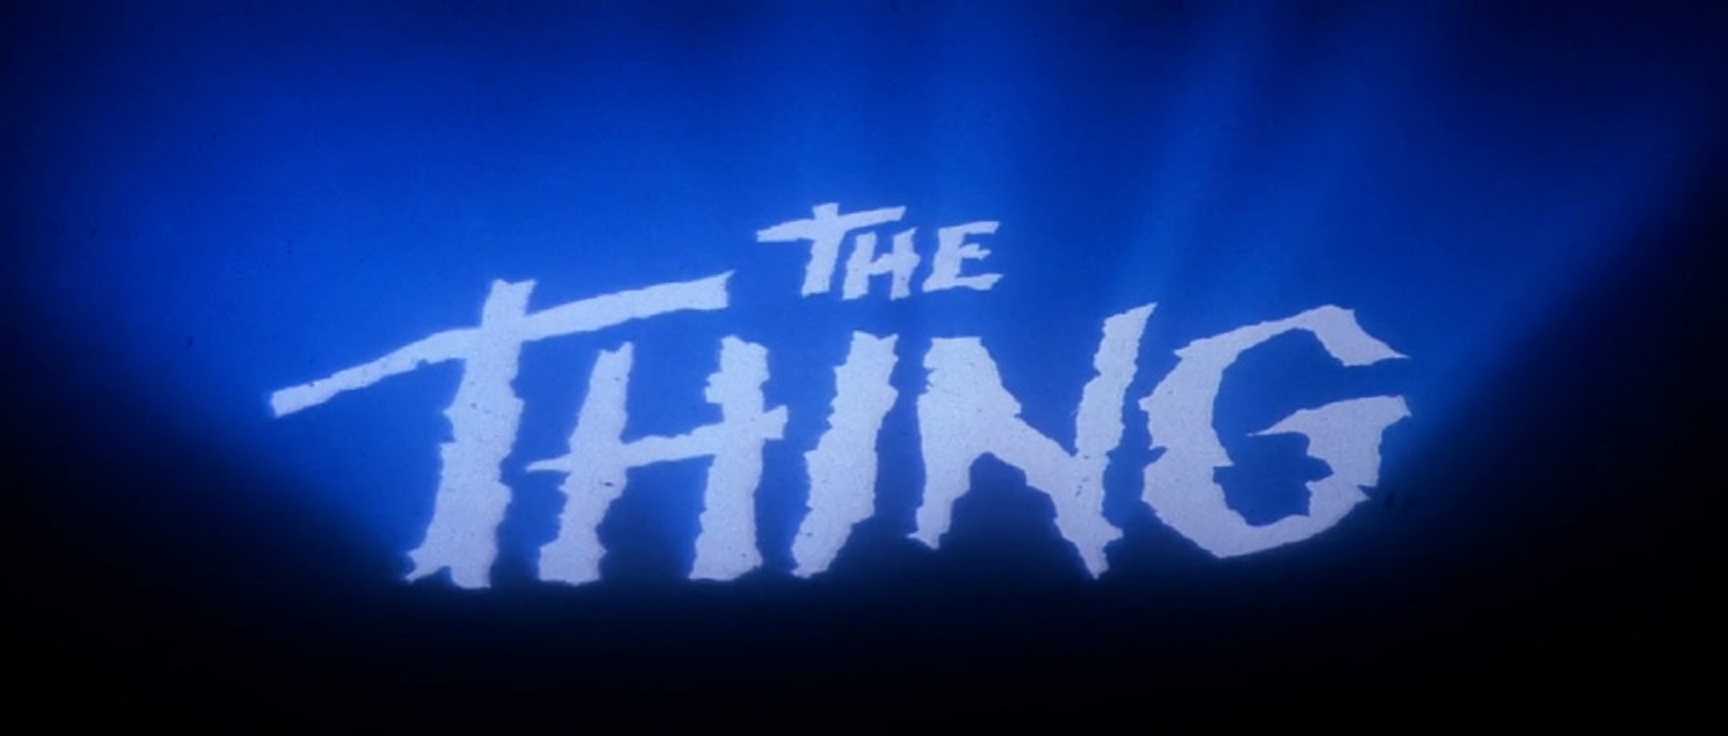 Universal And Blumhouse Developing The Thing, Based On A Newly Discovered Novel